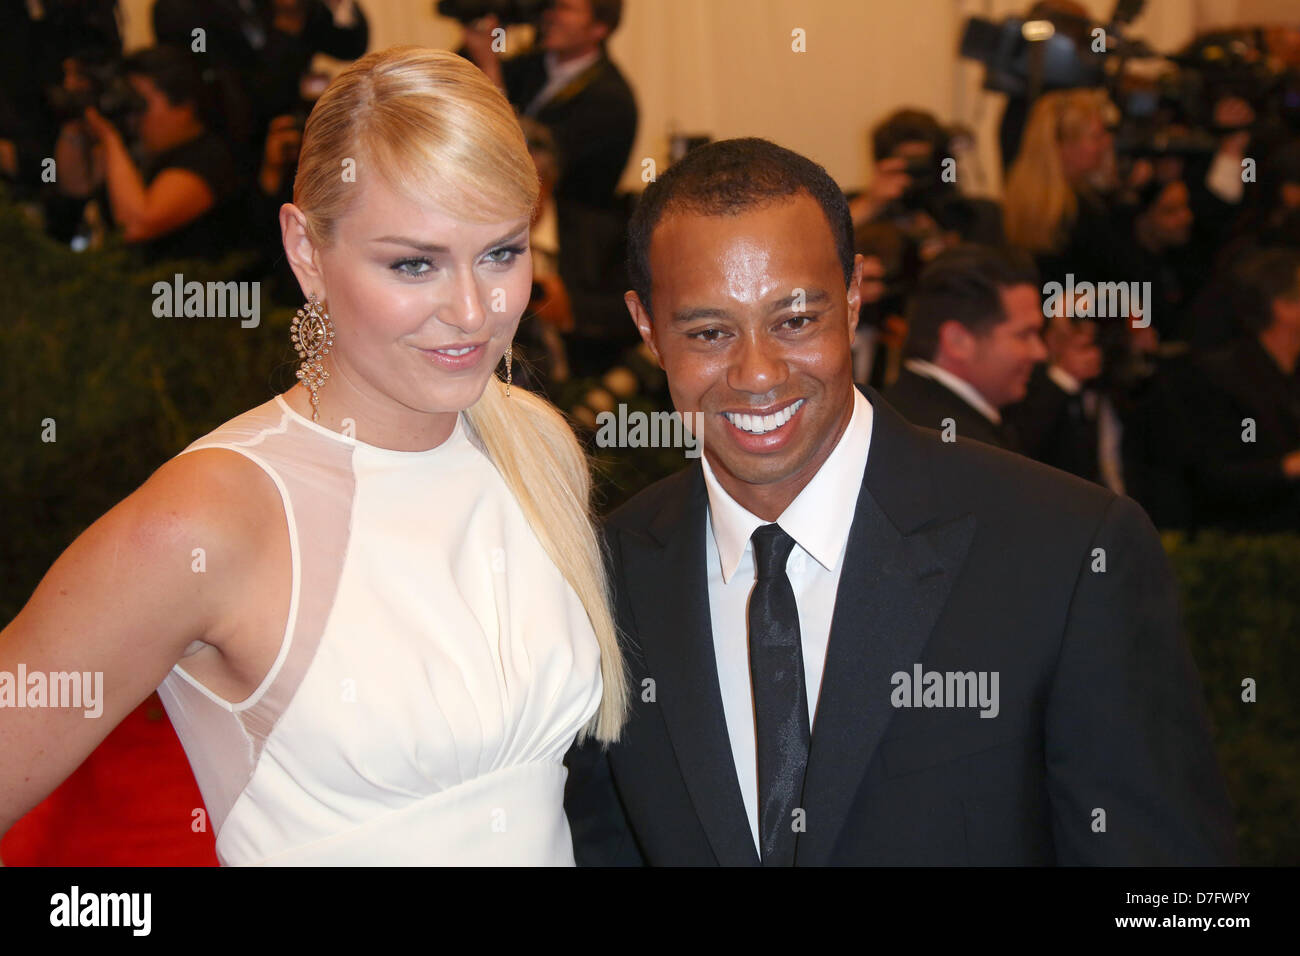 Tiger Woods and Lindsay Vonn arrive at the Costume Institute Gala for the 'Punk: Chaos to Couture' exhibition at the Metropolitan Museum of Art in New York City, USA, on 06 May 2013. Photo: Luis Garcia Stock Photo